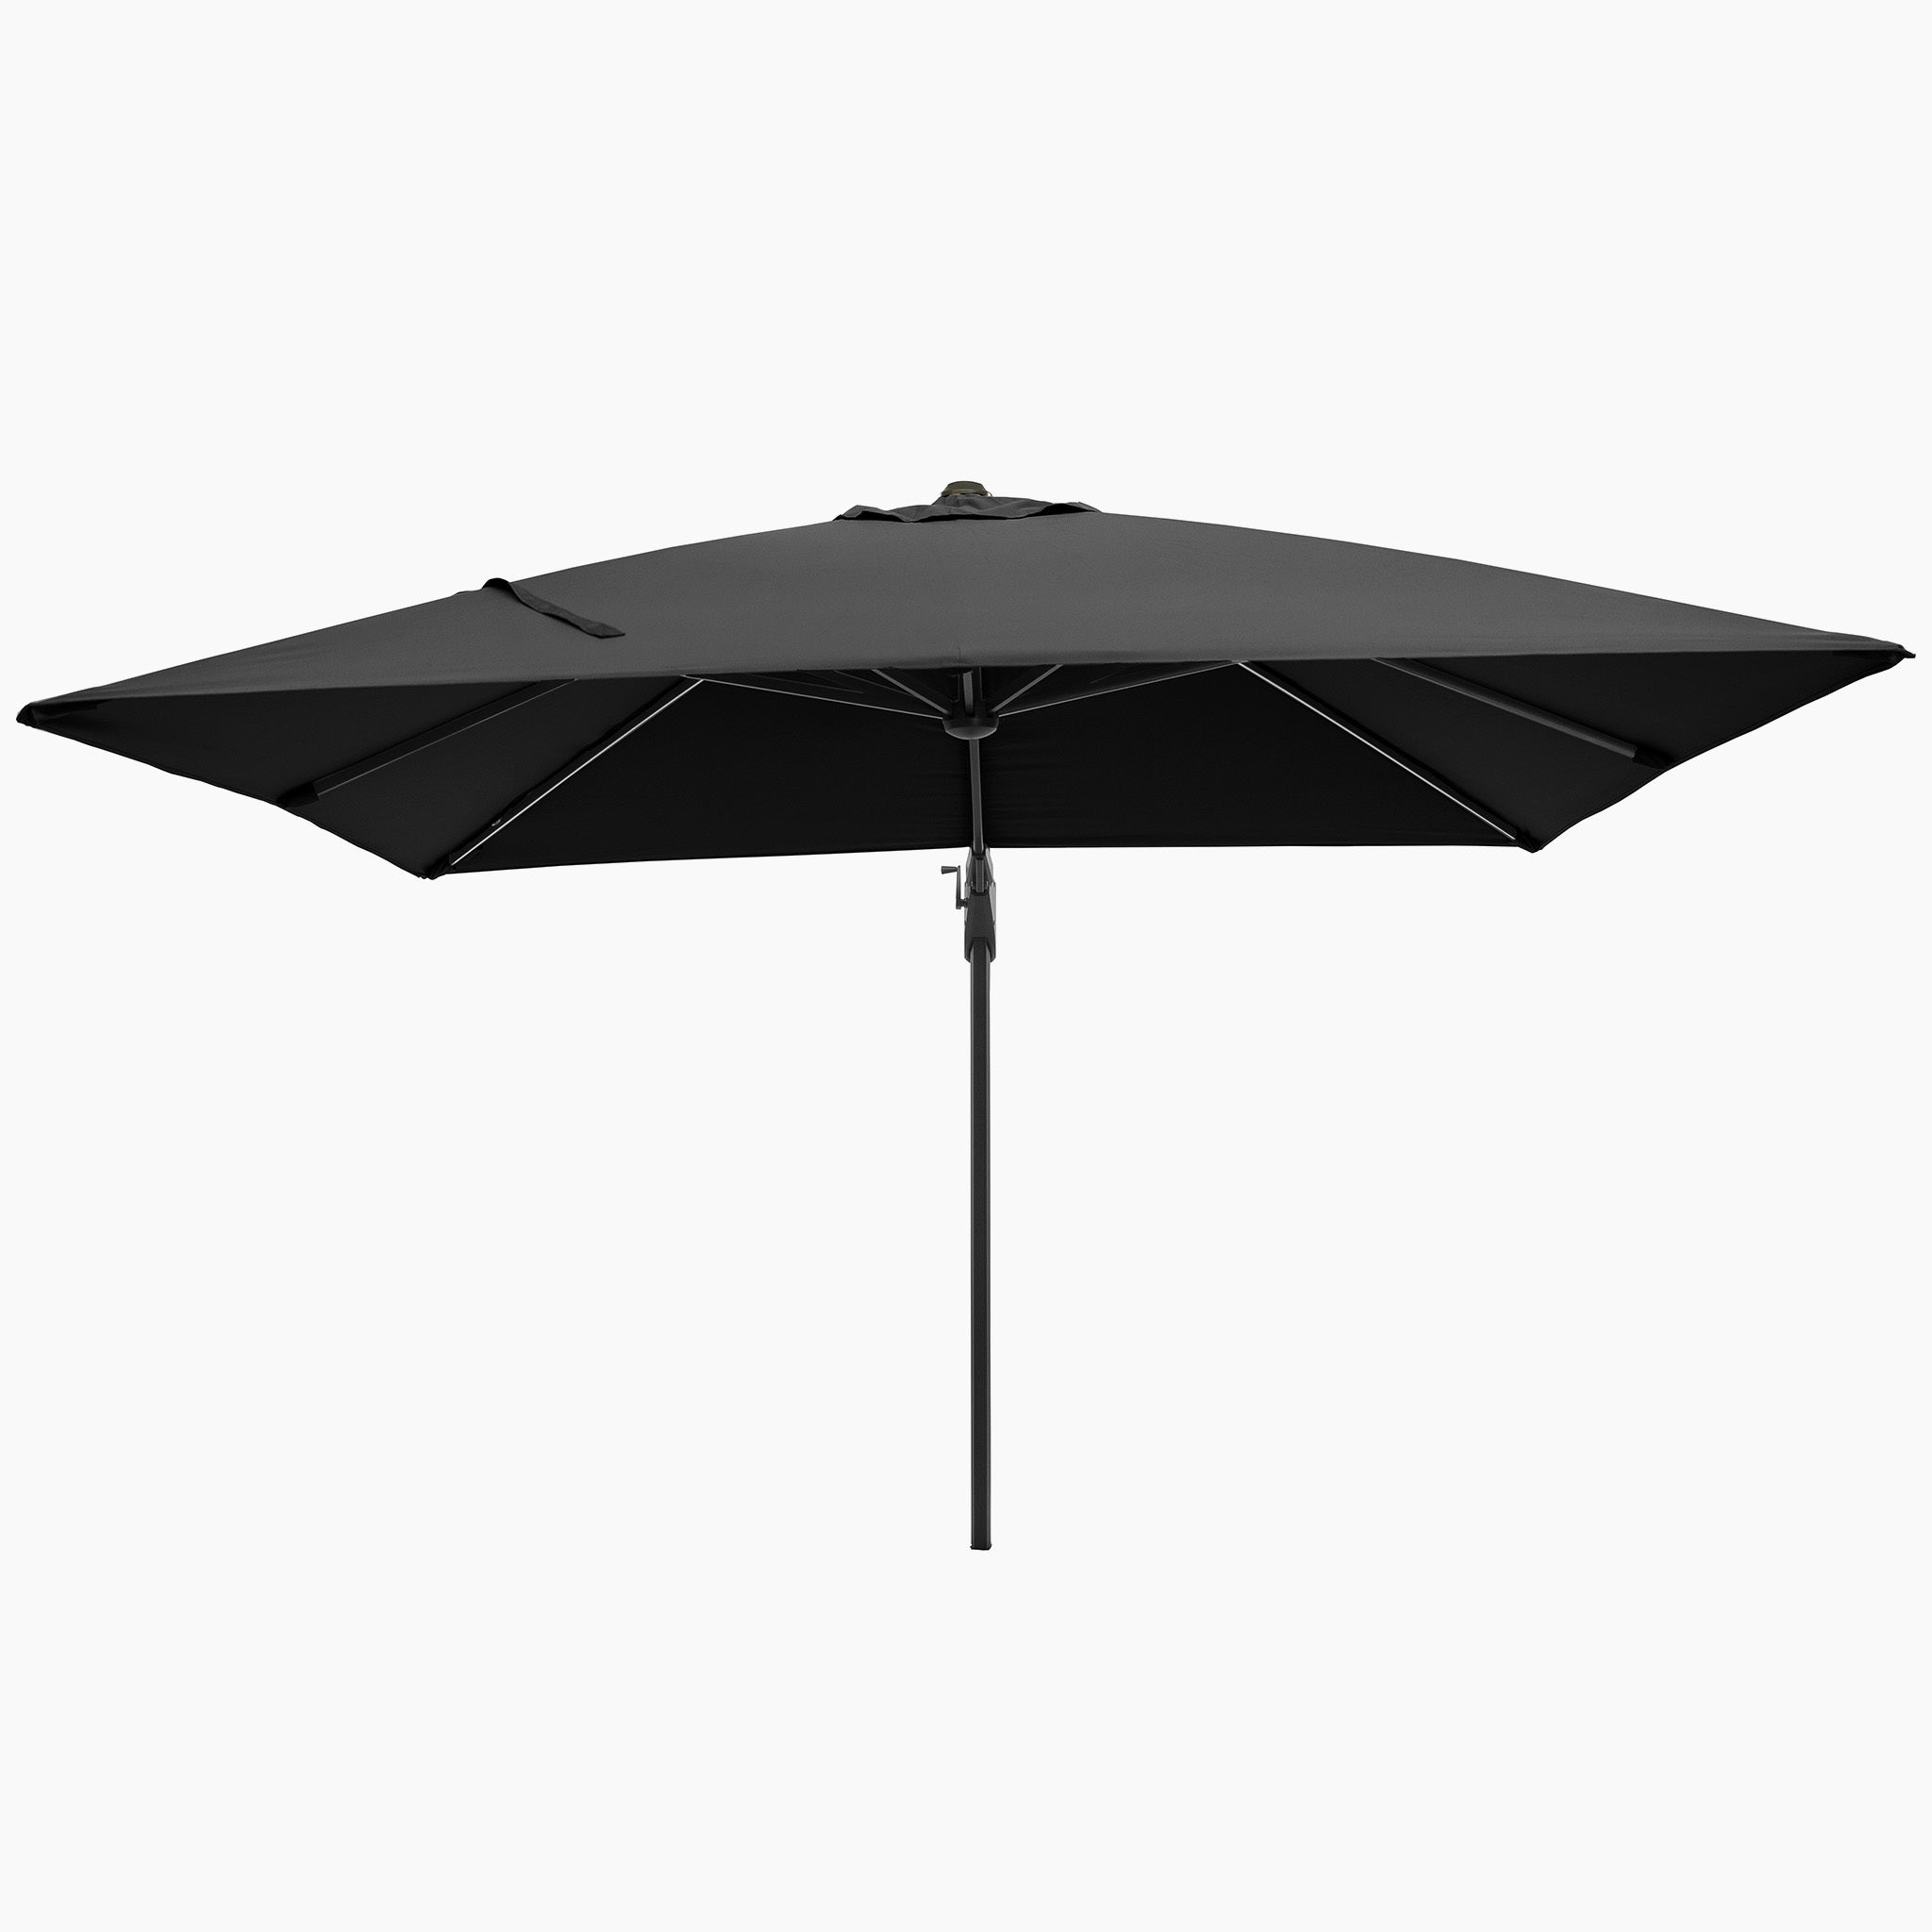 Glow Challenger T2 3m Square Cantilever Parasol in Anthracite